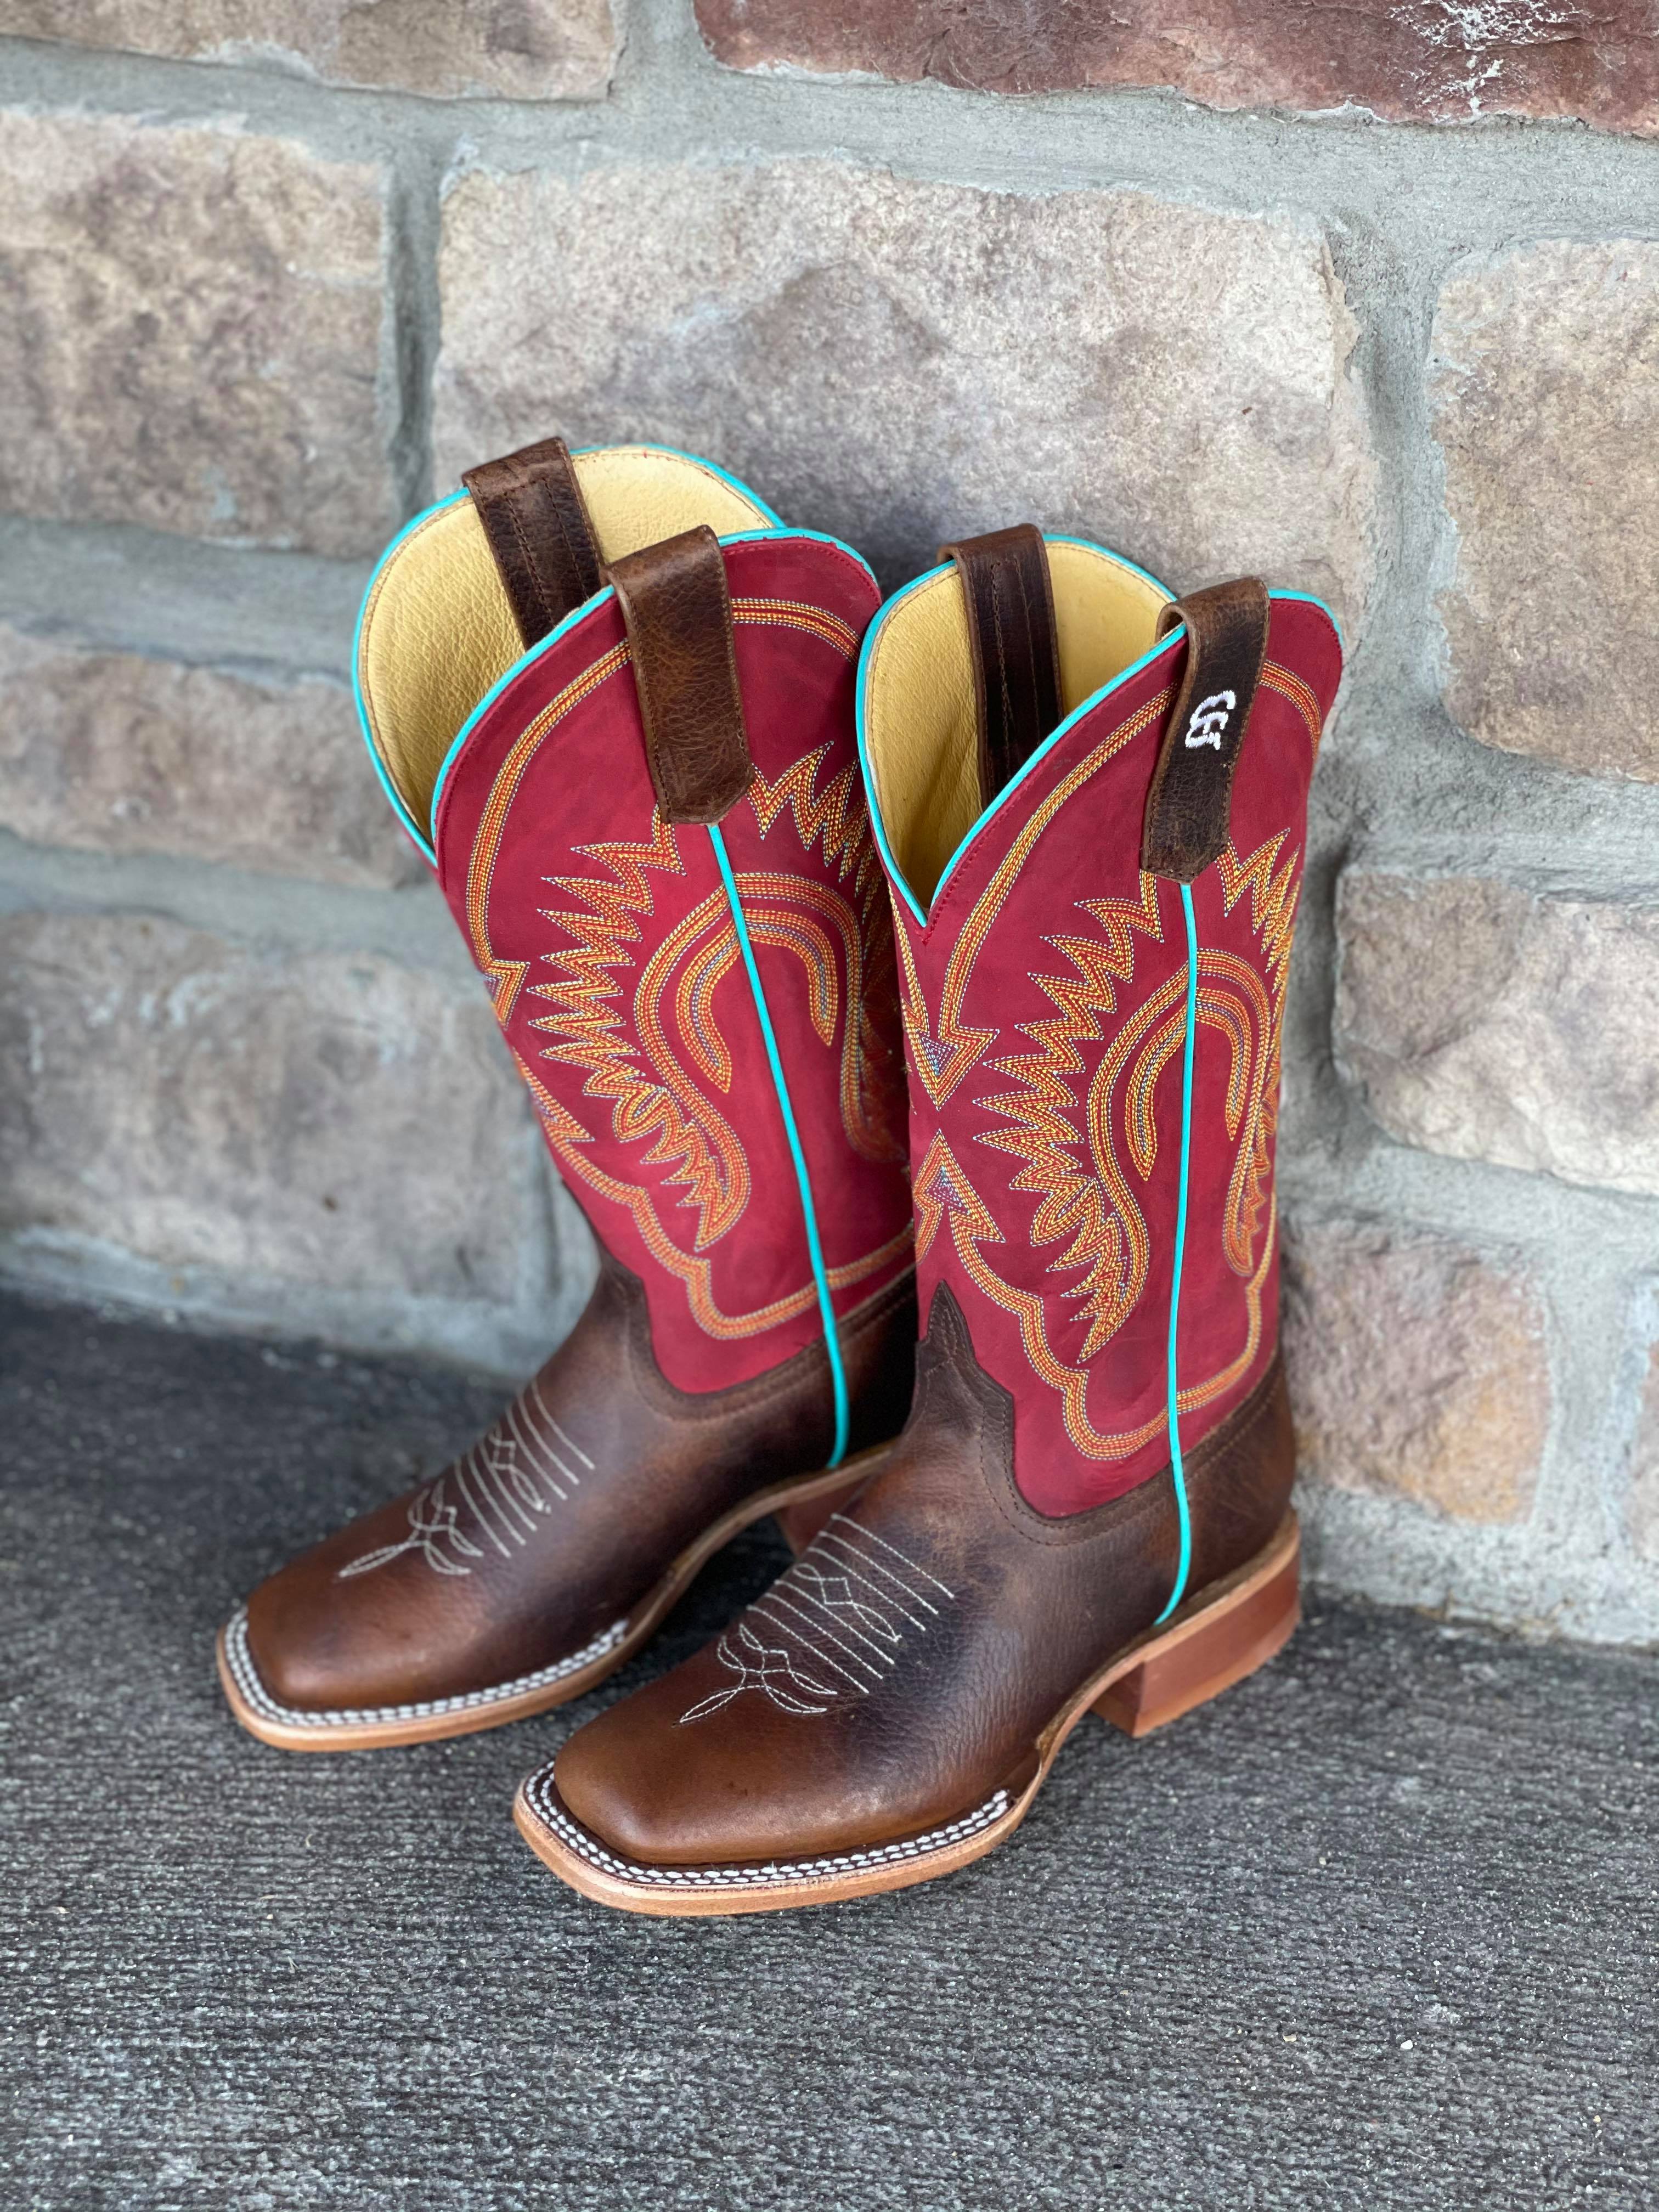 AB Youth Moka Pit Bull Square Toe Boot-Kids Boots-Anderson Bean-Lucky J Boots & More, Women's, Men's, & Kids Western Store Located in Carthage, MO